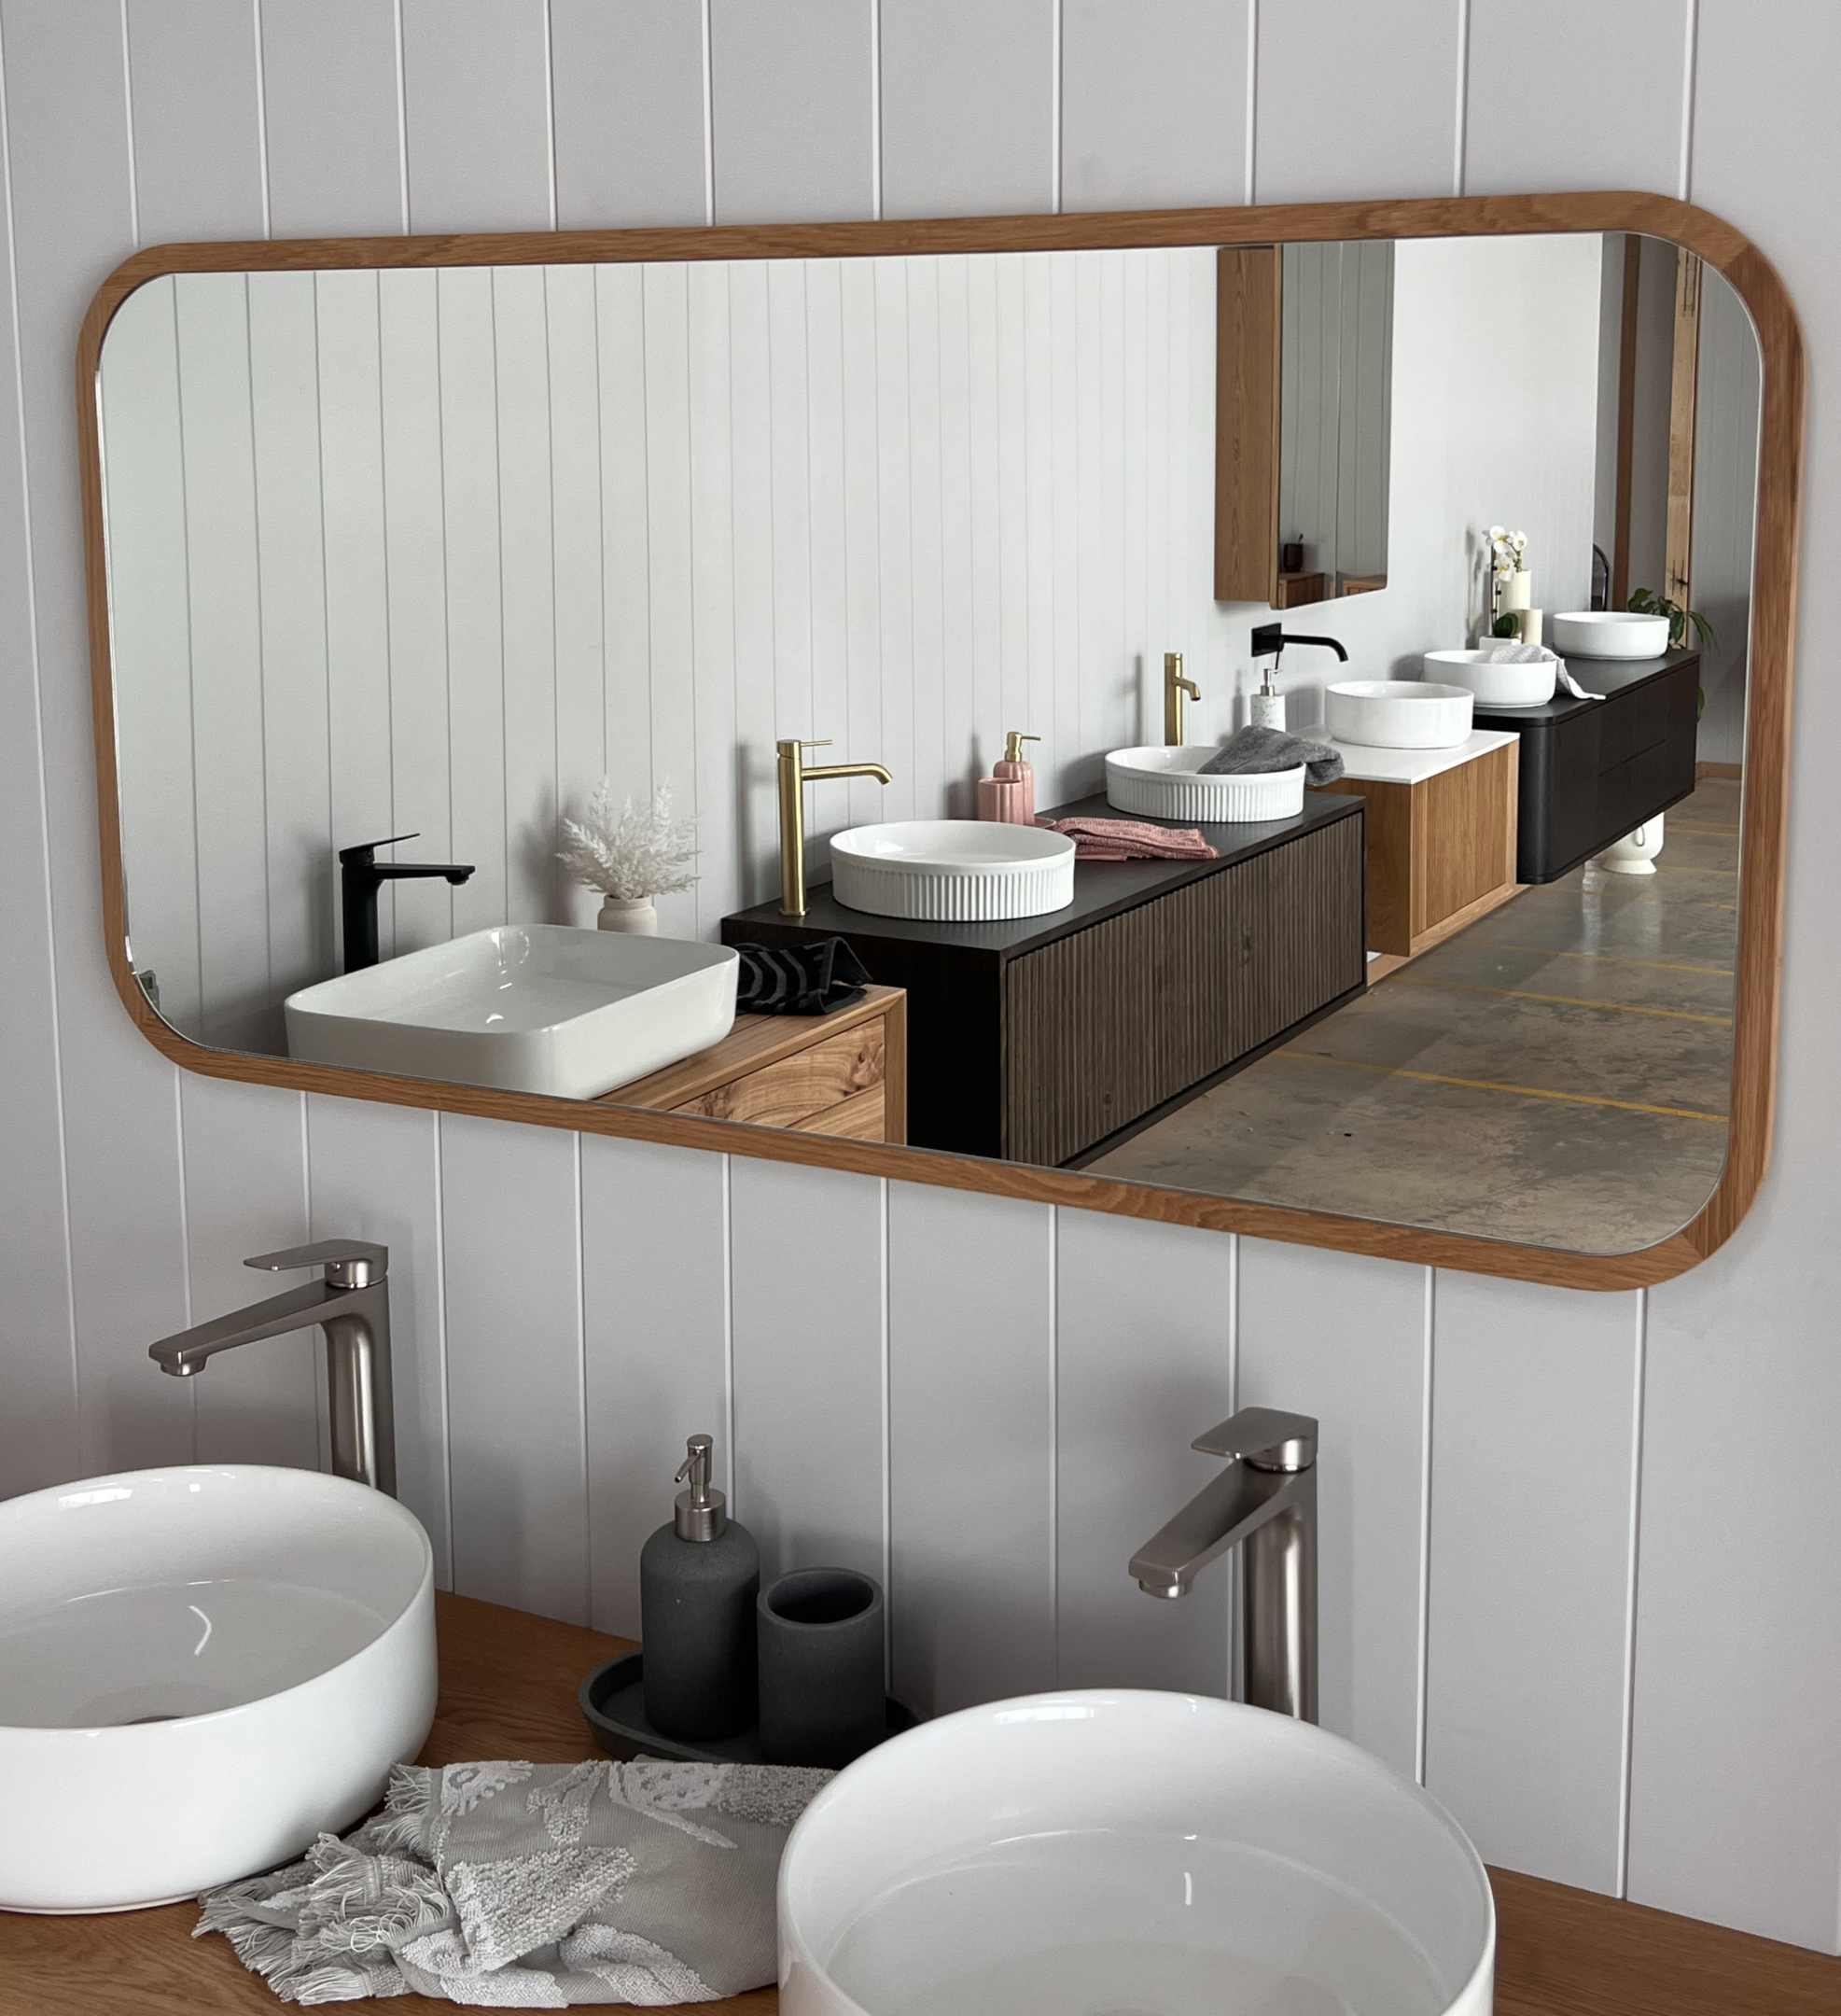 Shop instore at Kariko for a wide selection of timber bathroom vanities